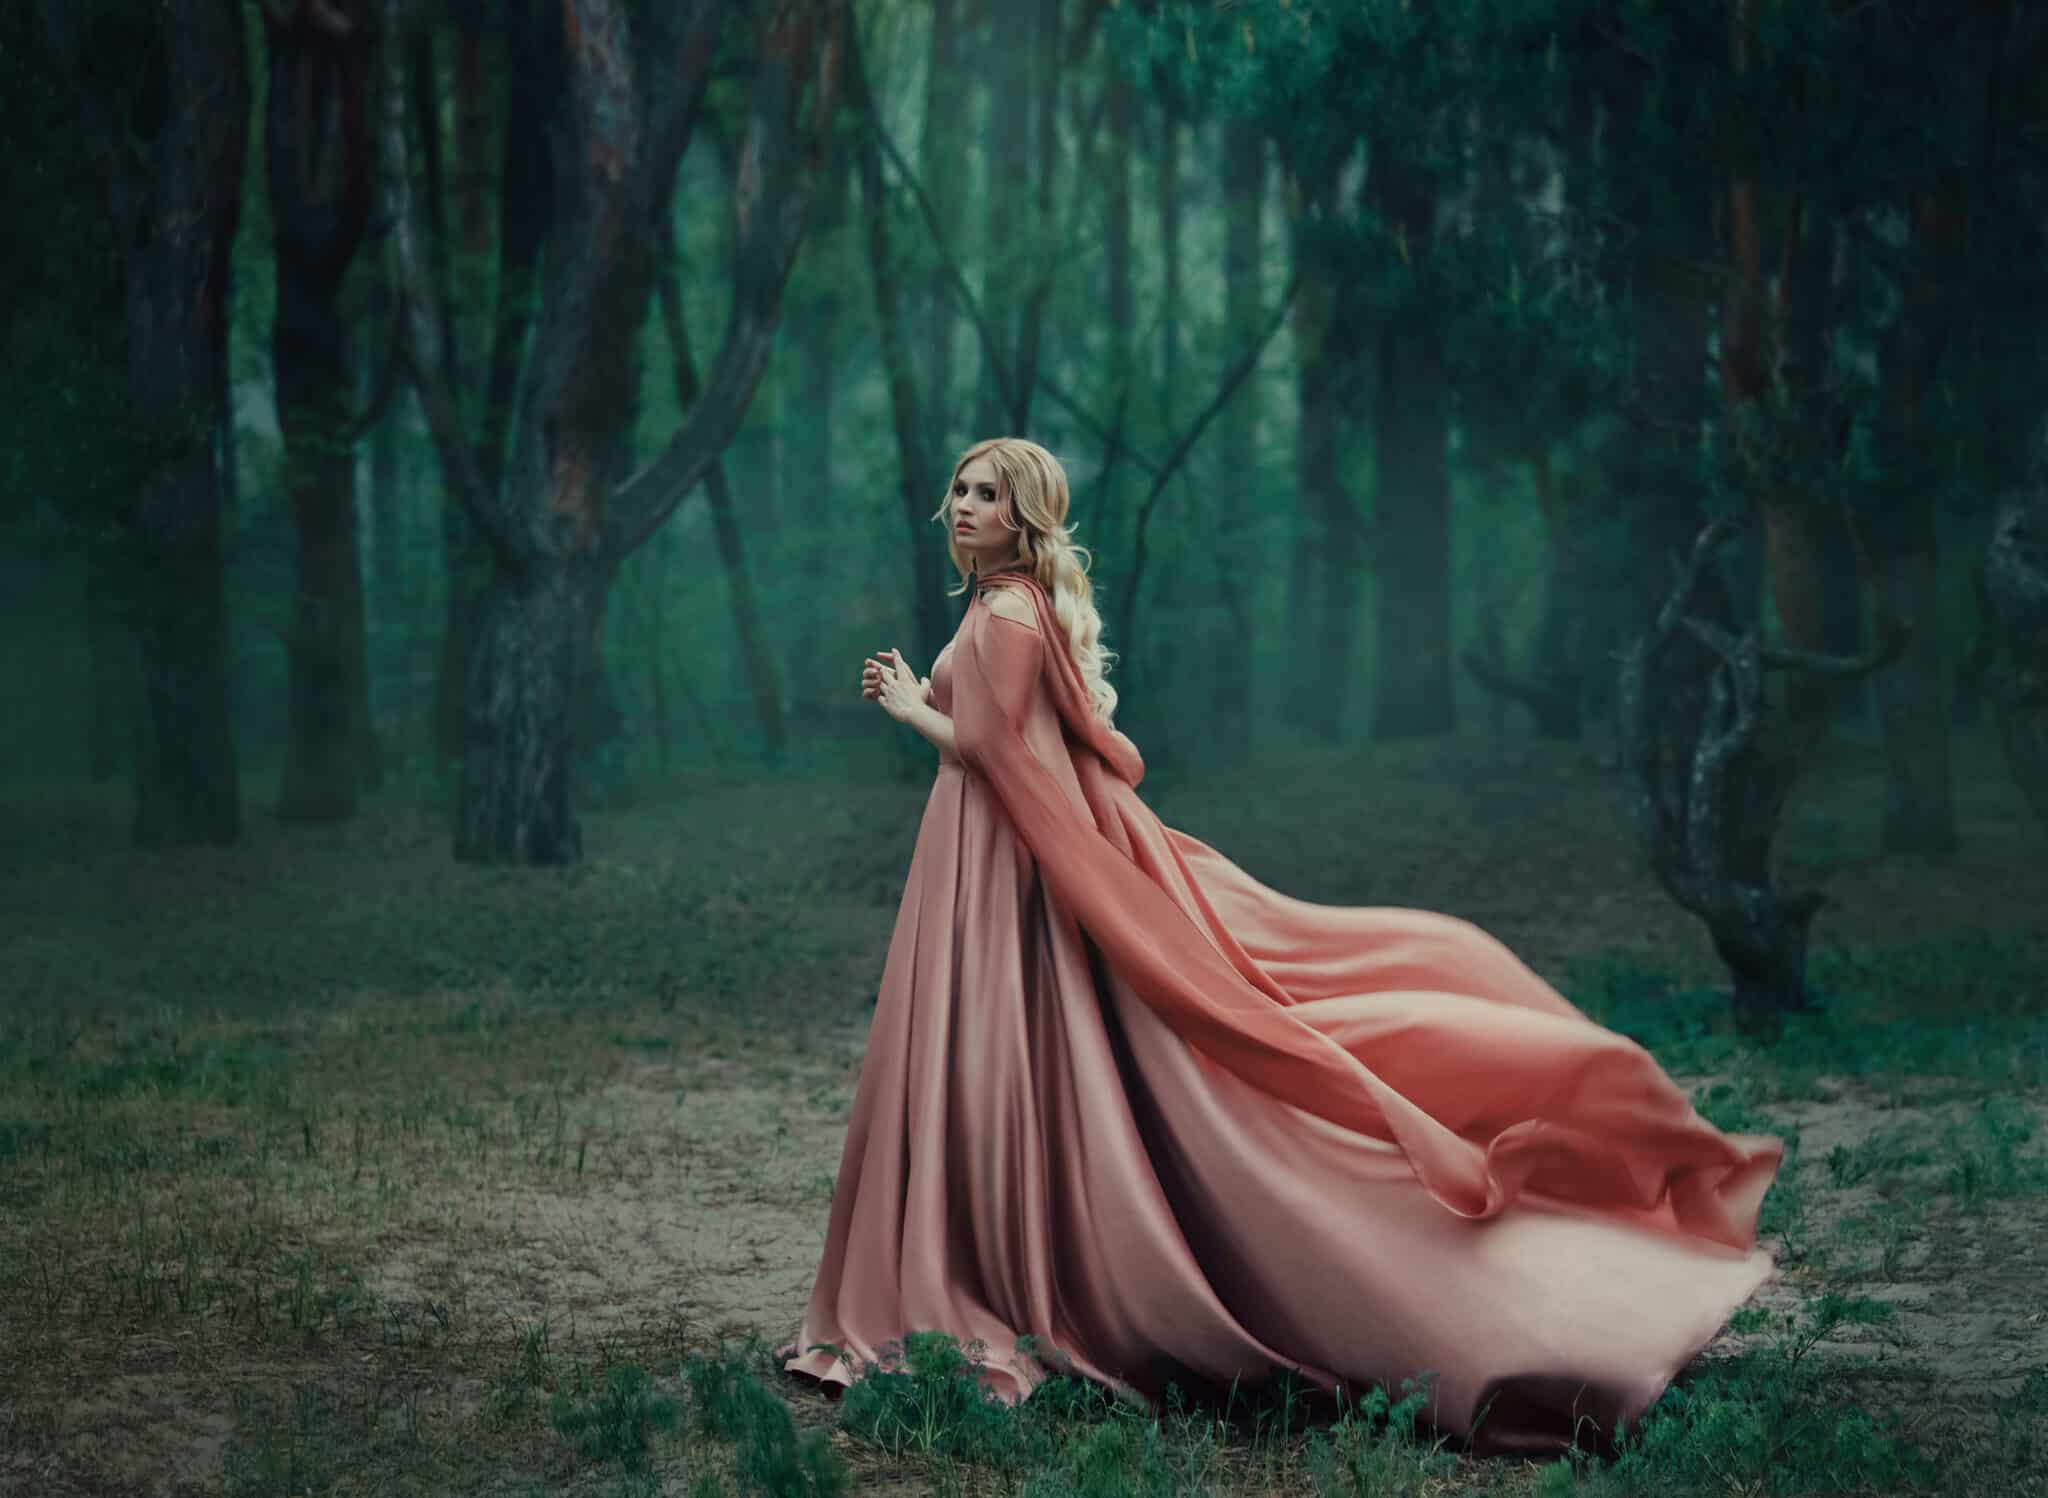 A mysterious blonde girl in a long pink dress with a train and a raincoat that flutters in the wind.